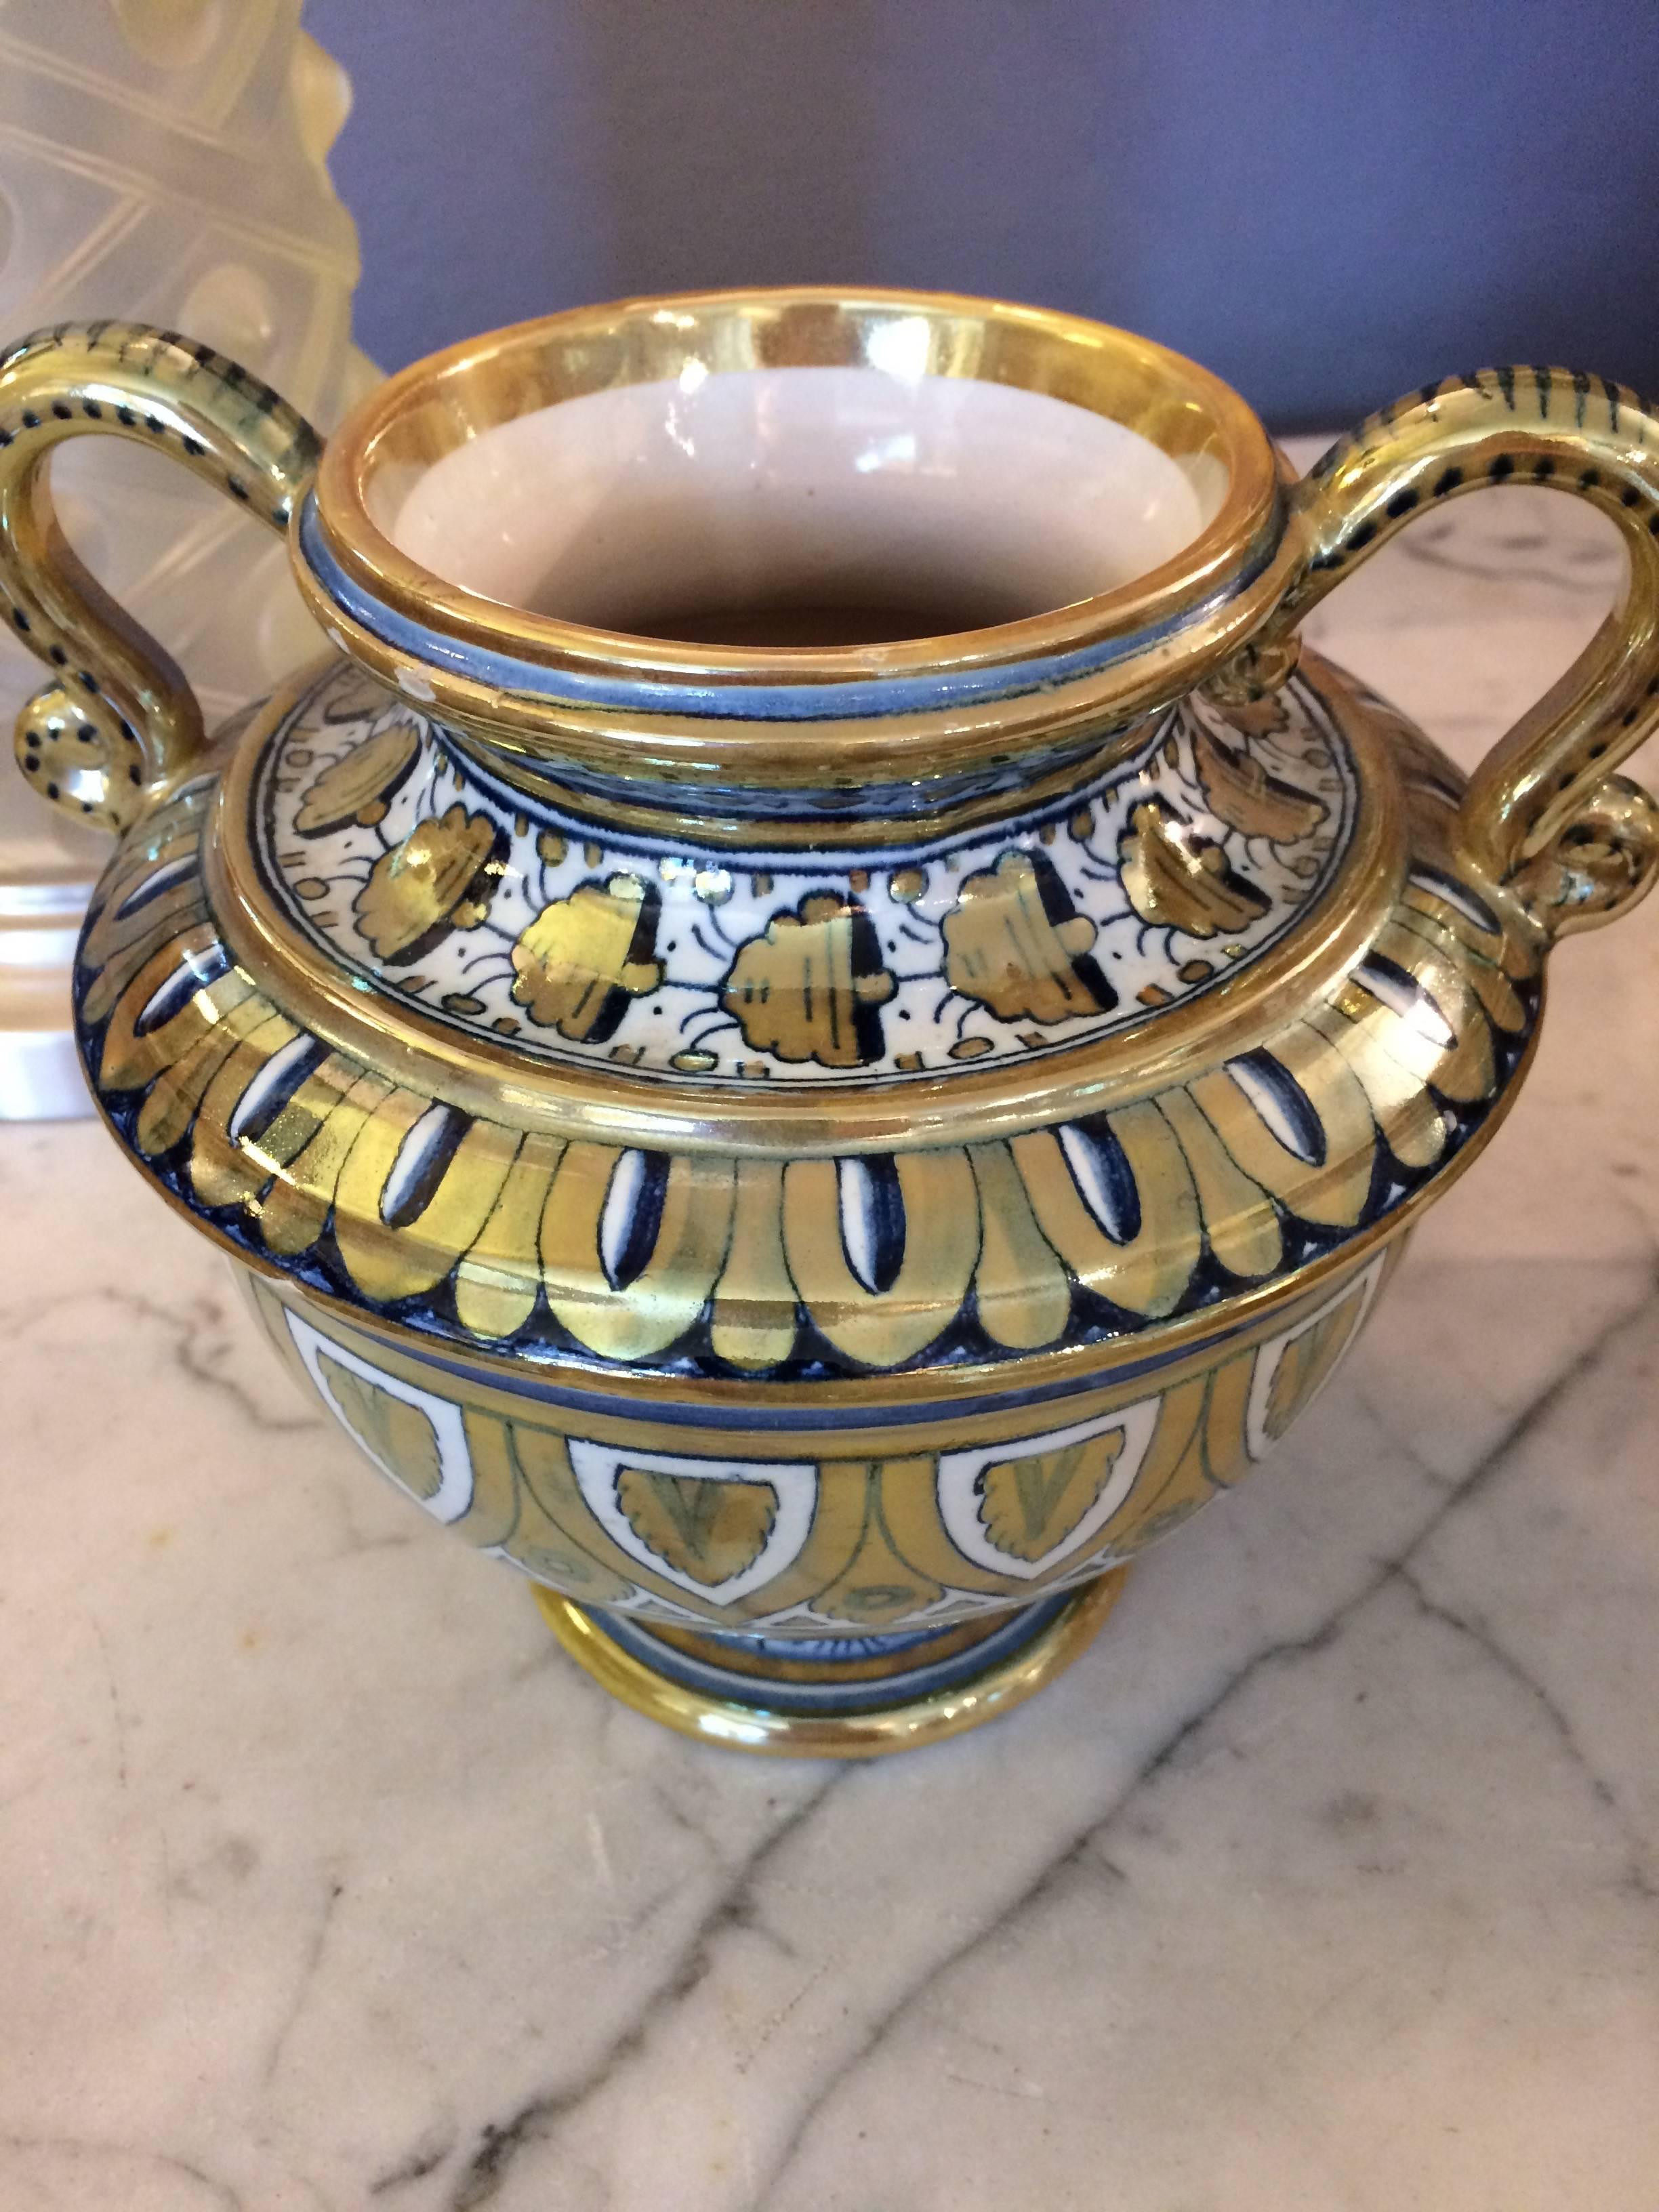 Lovely pair of compotes with urn shape and curved handles, having gorgeous white, gold and navy blue intricate pattern.

 